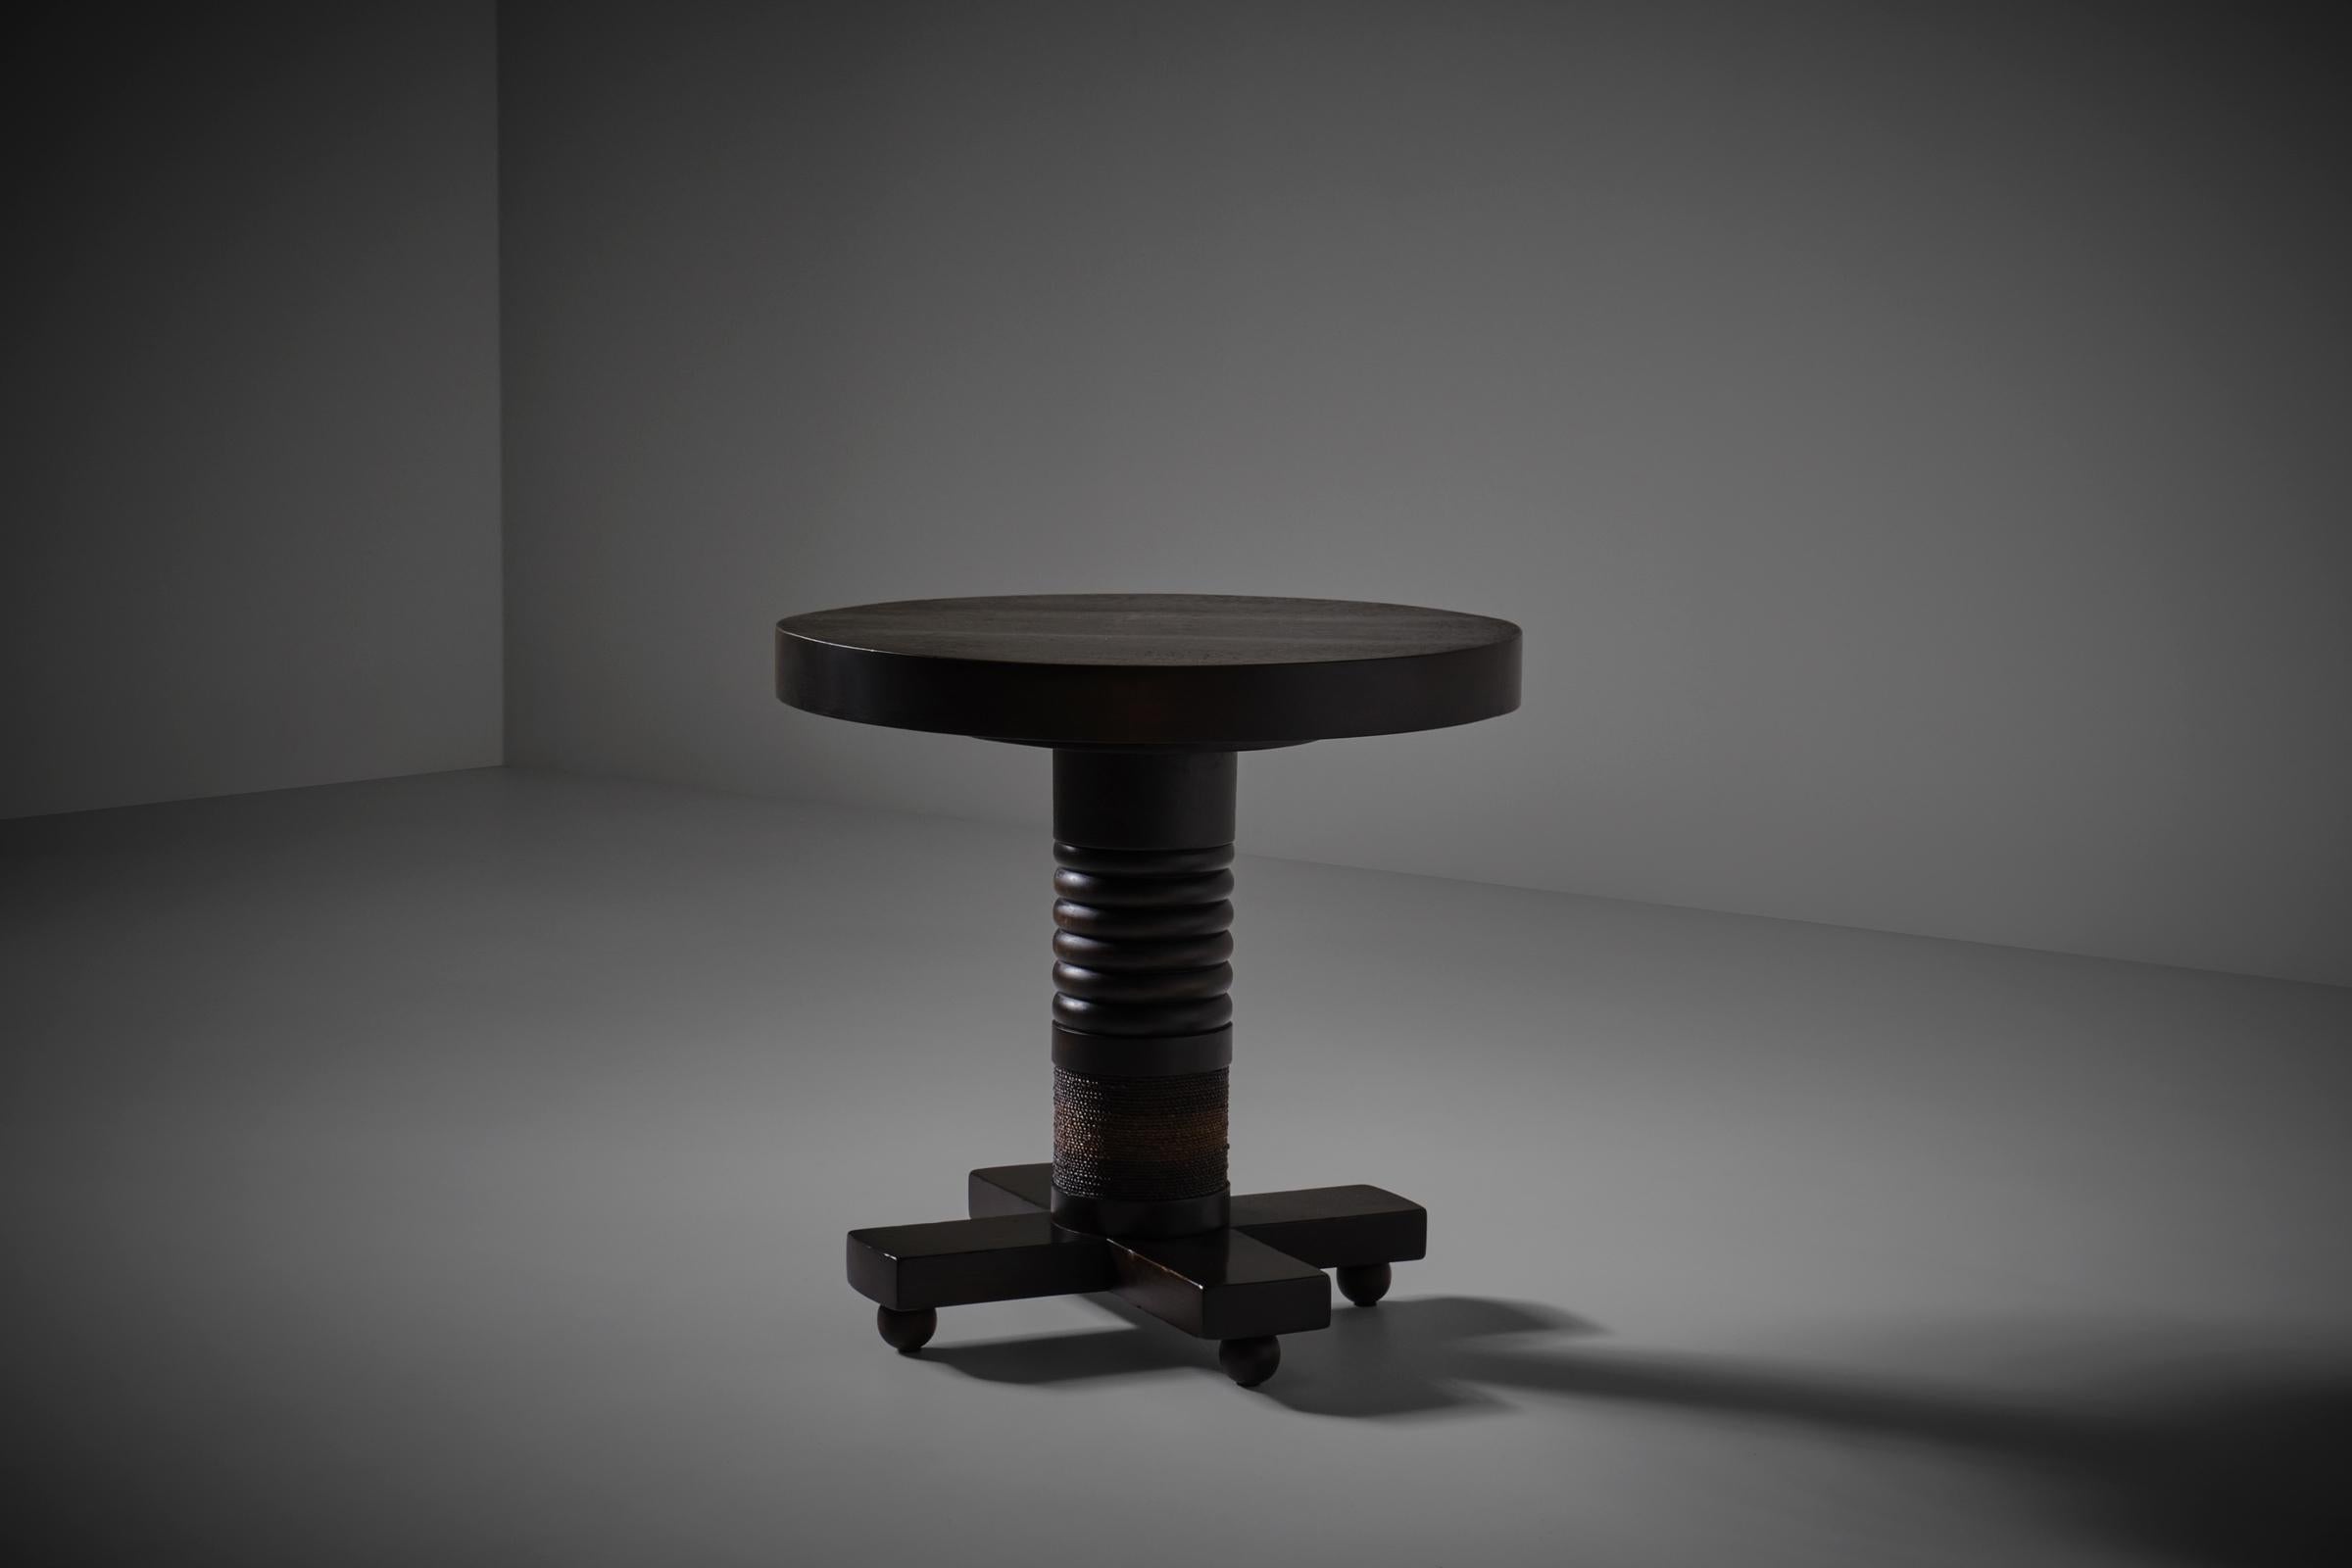 Sculptural Art Deco side table, France 1920s. A beautifully by hand chiseled round dark stained Alder wooden table top rests on a nice detailed base constructed out of a stacked ring shaped center column with elegant sisal rope detailing on a cross